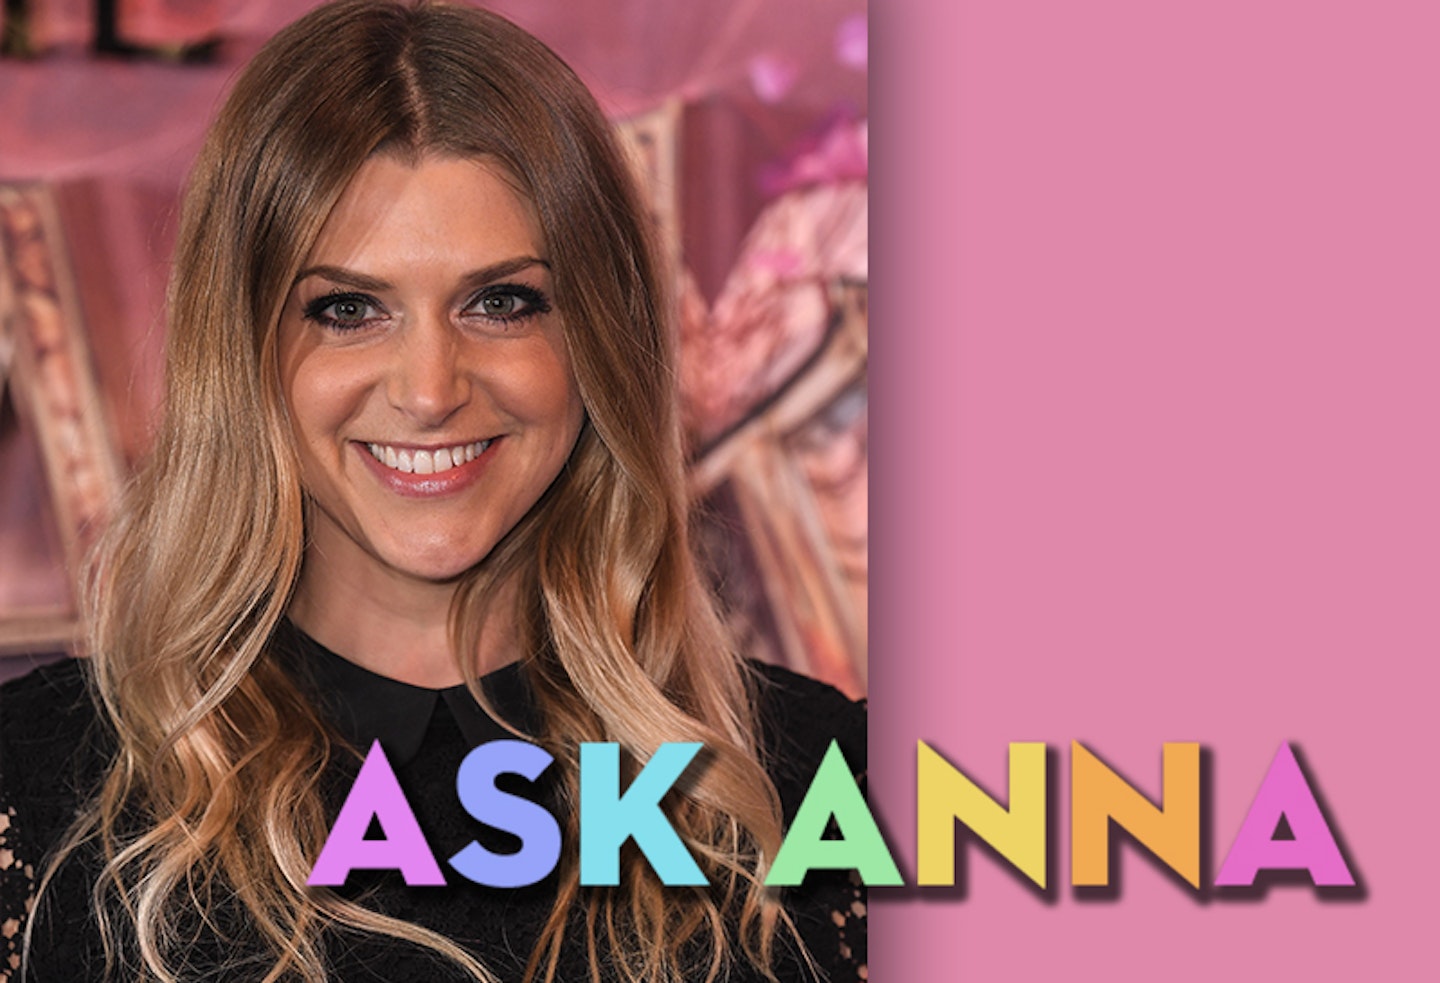 Ask Anna: “How do I tell my boss about my postnatal depression?”